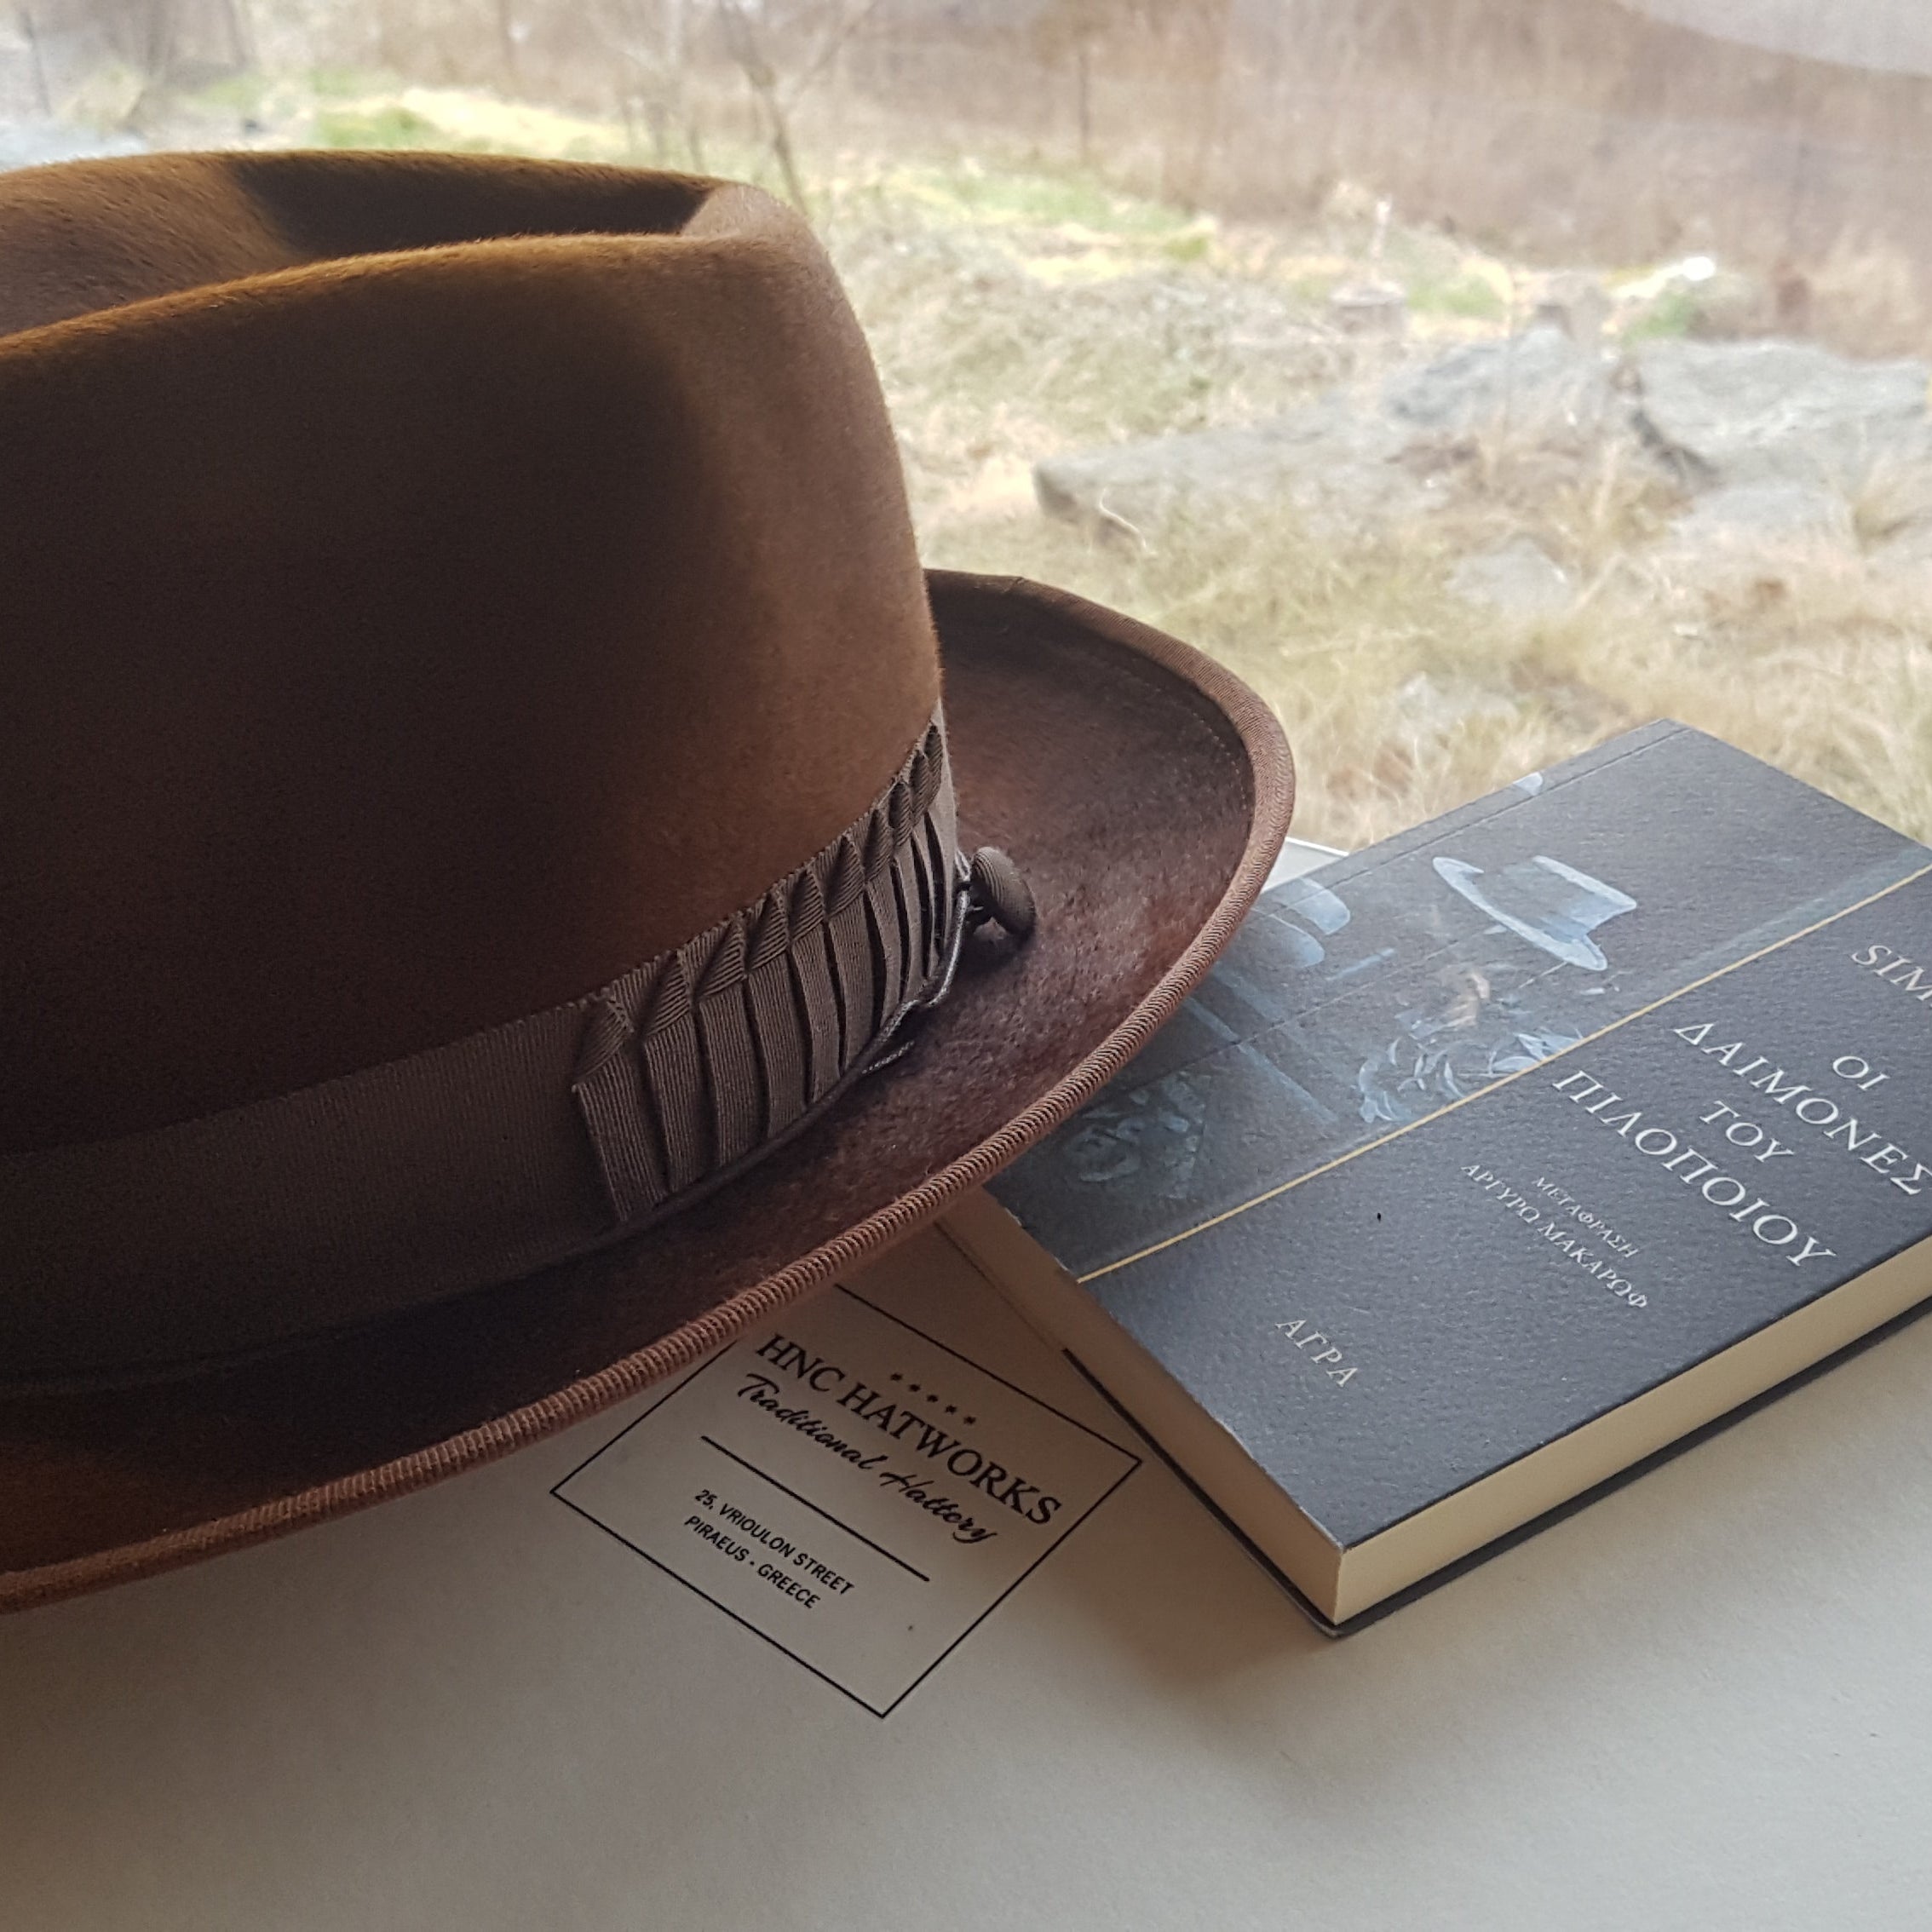 A stylish brown felt fedora hat placed next to a book on a wooden table, evoking a sense of timeless fashion and craftsmanship.